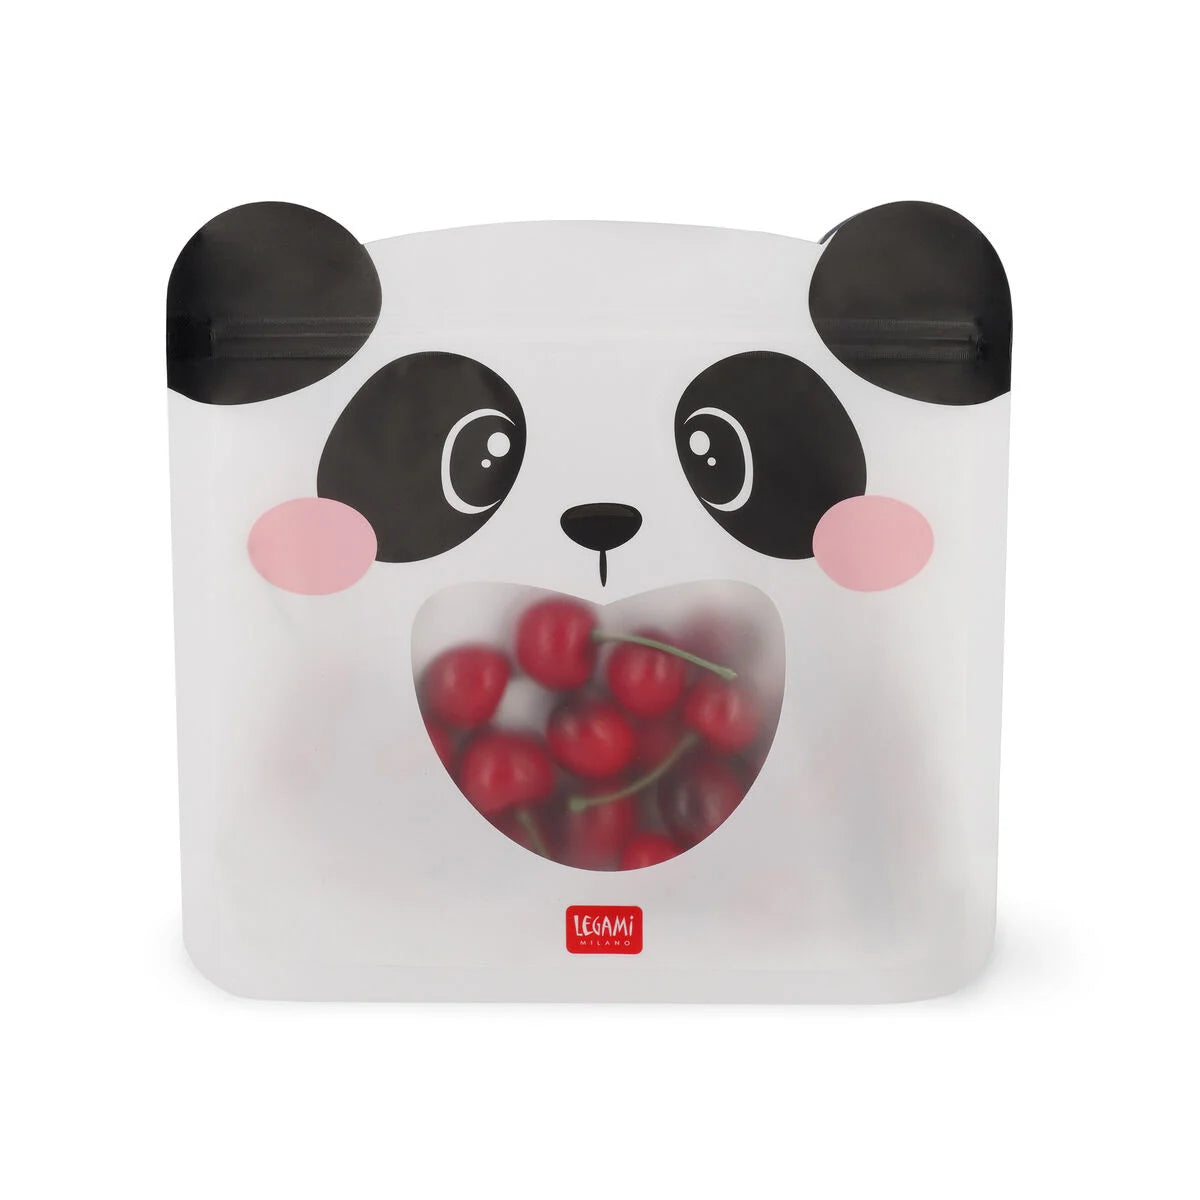 Fabulous Gifts Food Storage Legami Set Of 3 Reusable Food Pouches Panda by Weirs of Baggot Street